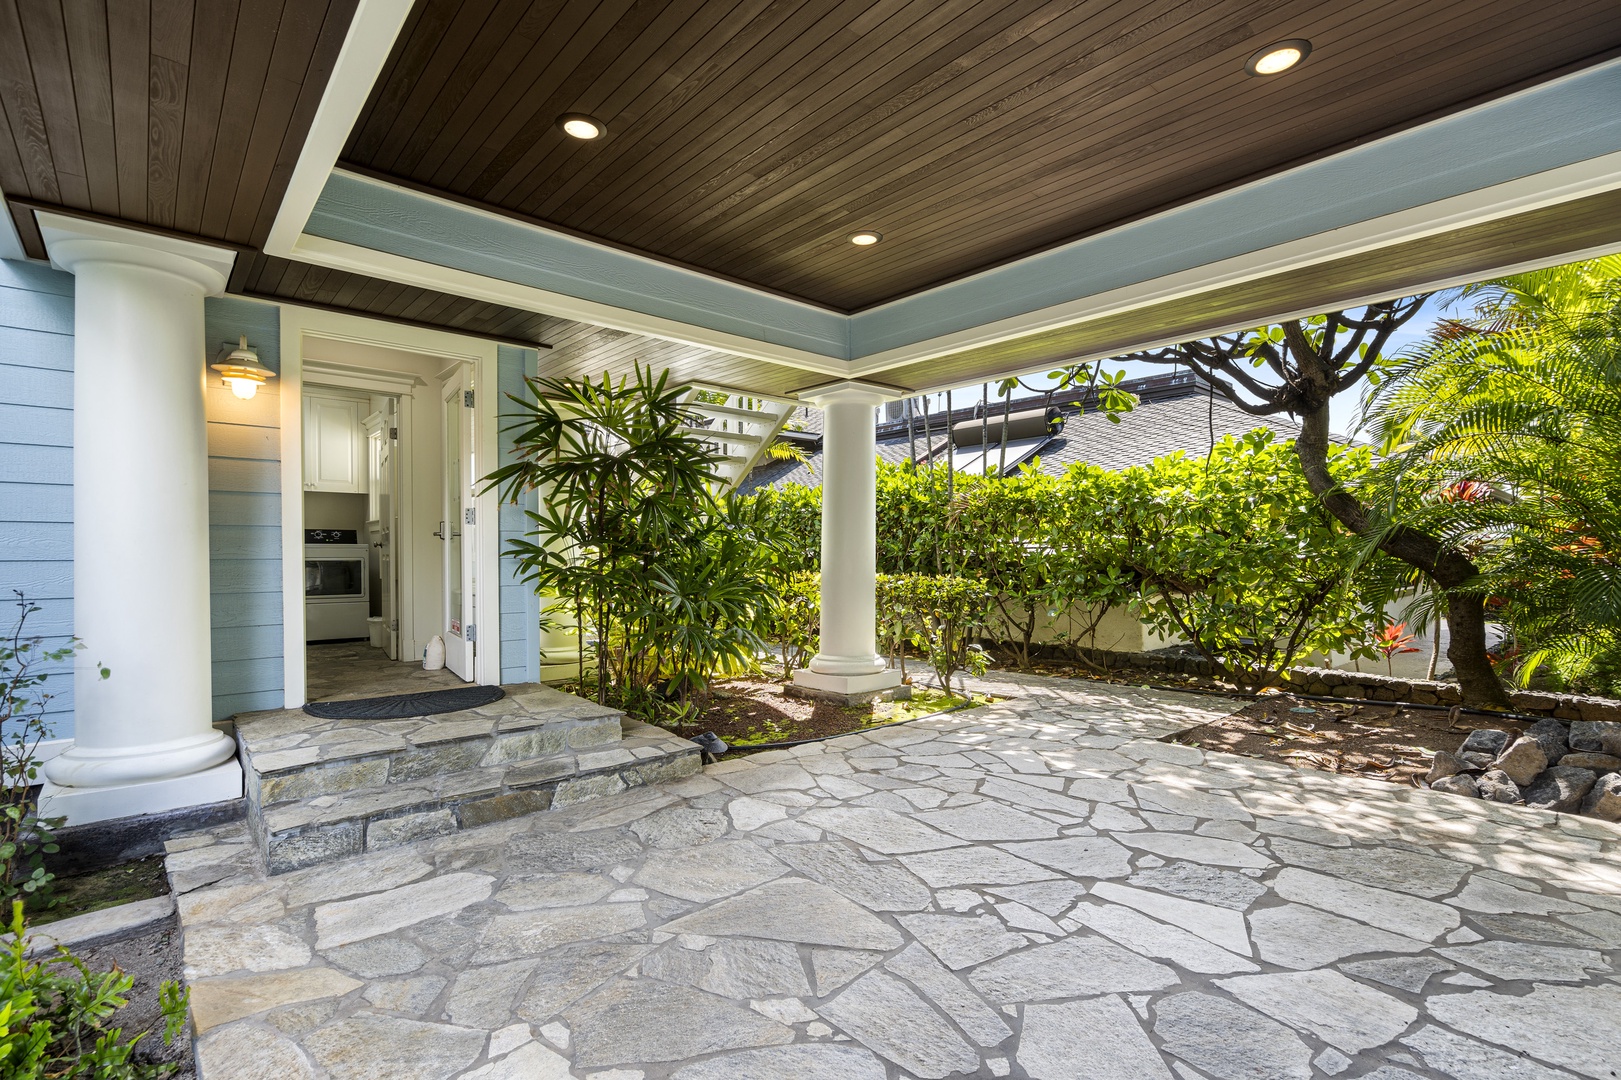 Kailua Kona Vacation Rentals, Kona Blue - Keyless entry equipped side door for guest convenience